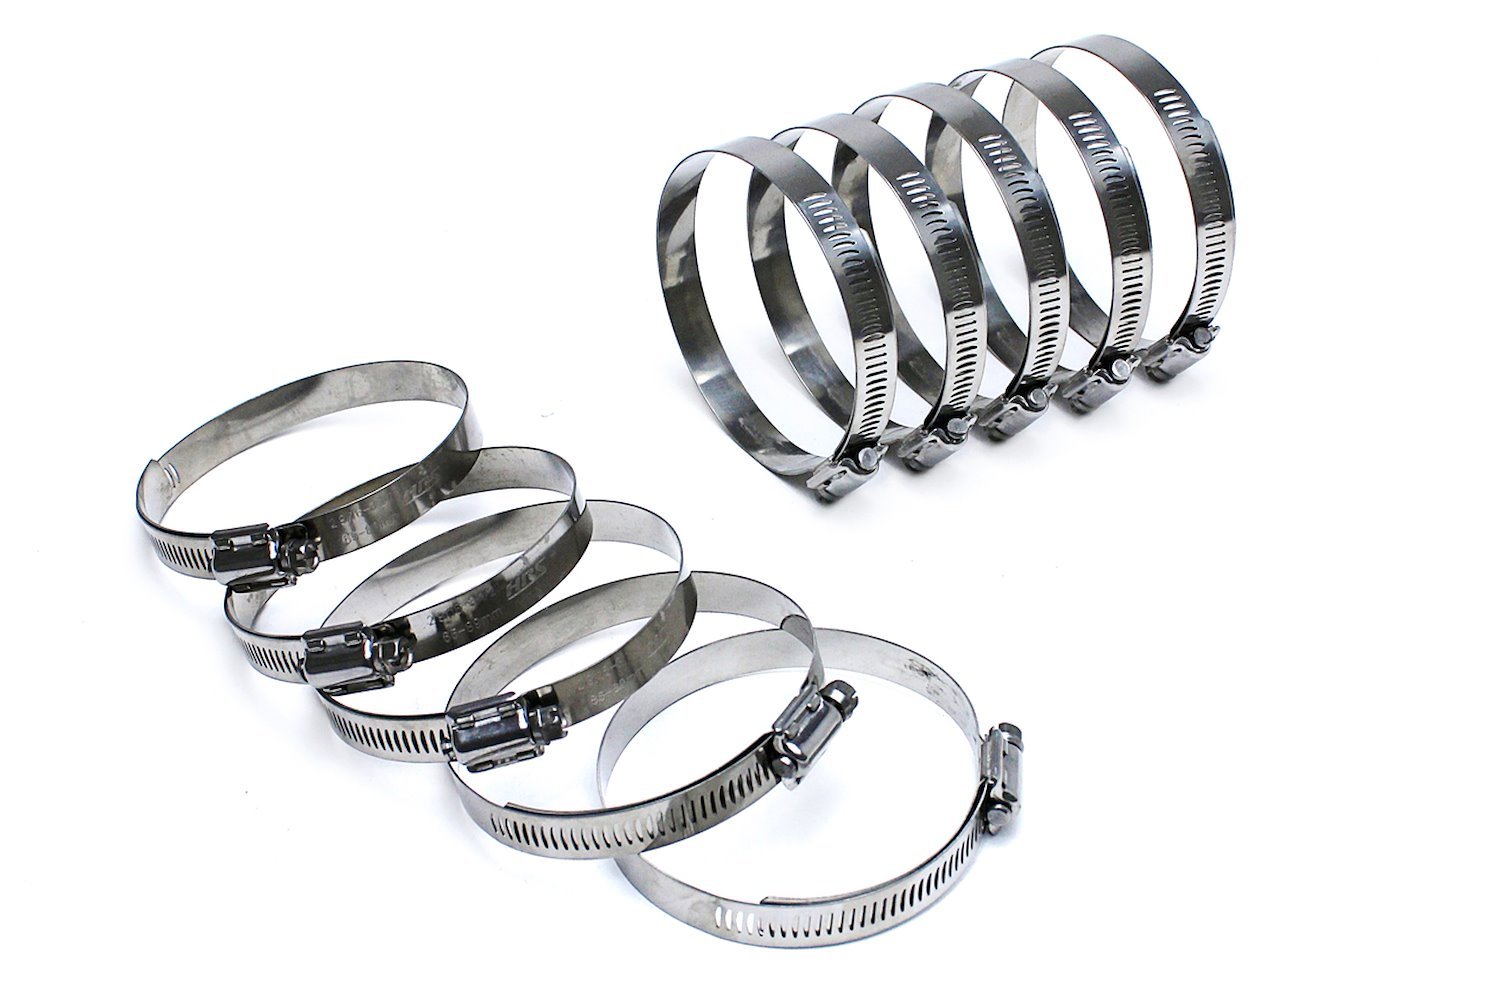 SSWC-71-95x10 Stainless Steel Worm Gear Hose Clamp, Effective Range: 2-13/16 in.- 3-3/4 in., 10Pc